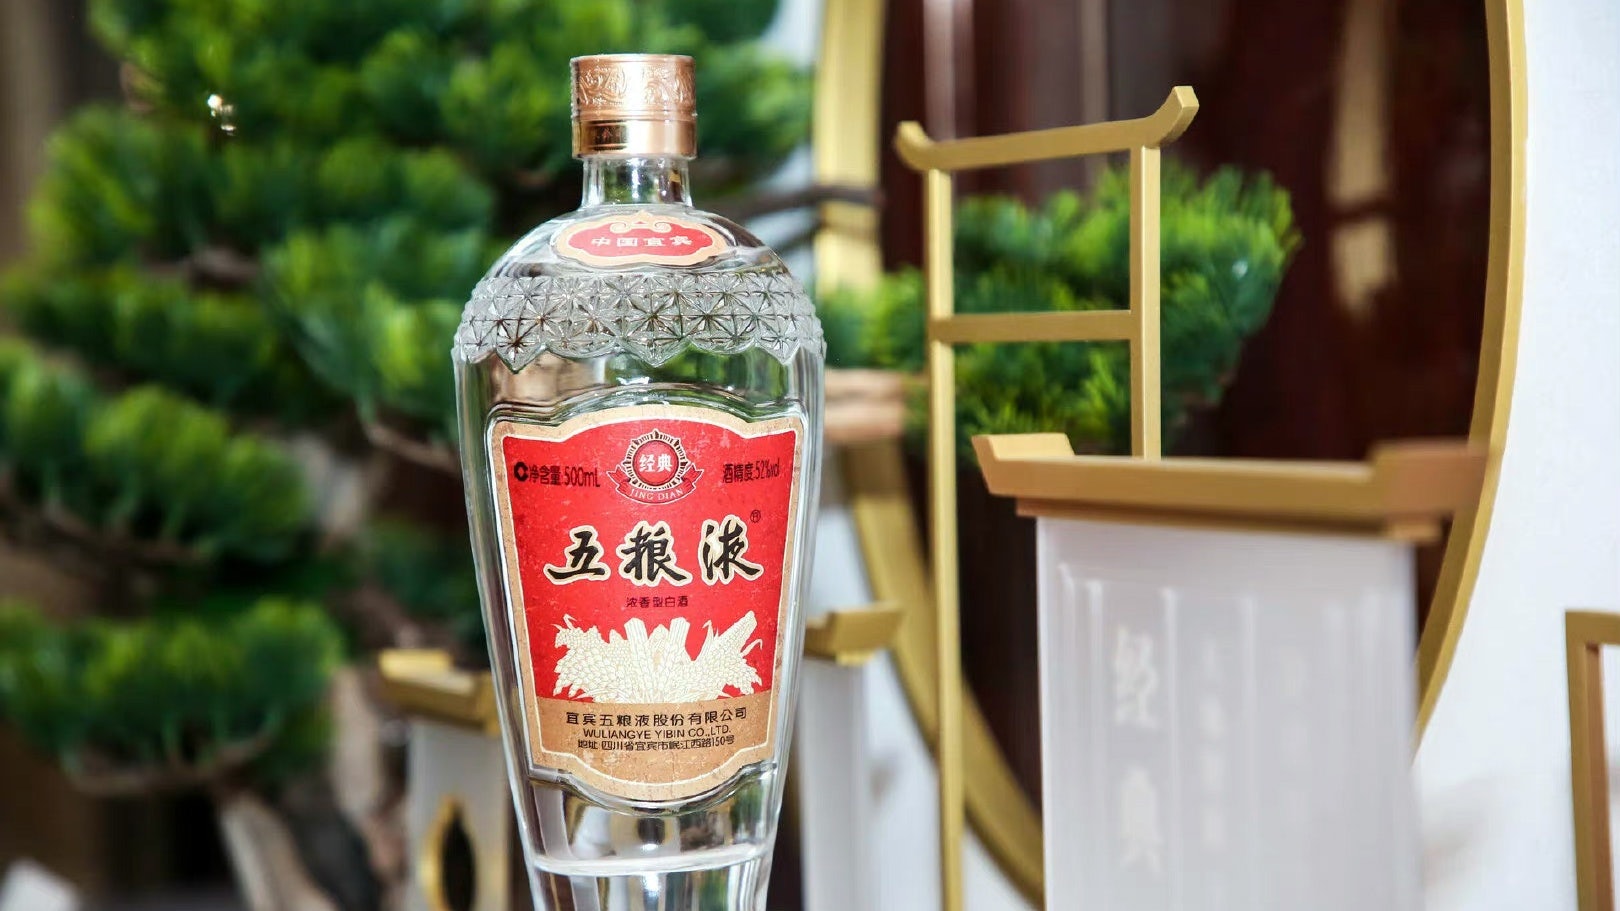 Baijiu brands are conquering the world, with Chinese labels now accounting for almost 70 percent of global brand value in spirits. What can luxury learn? Photo: Wuliangye